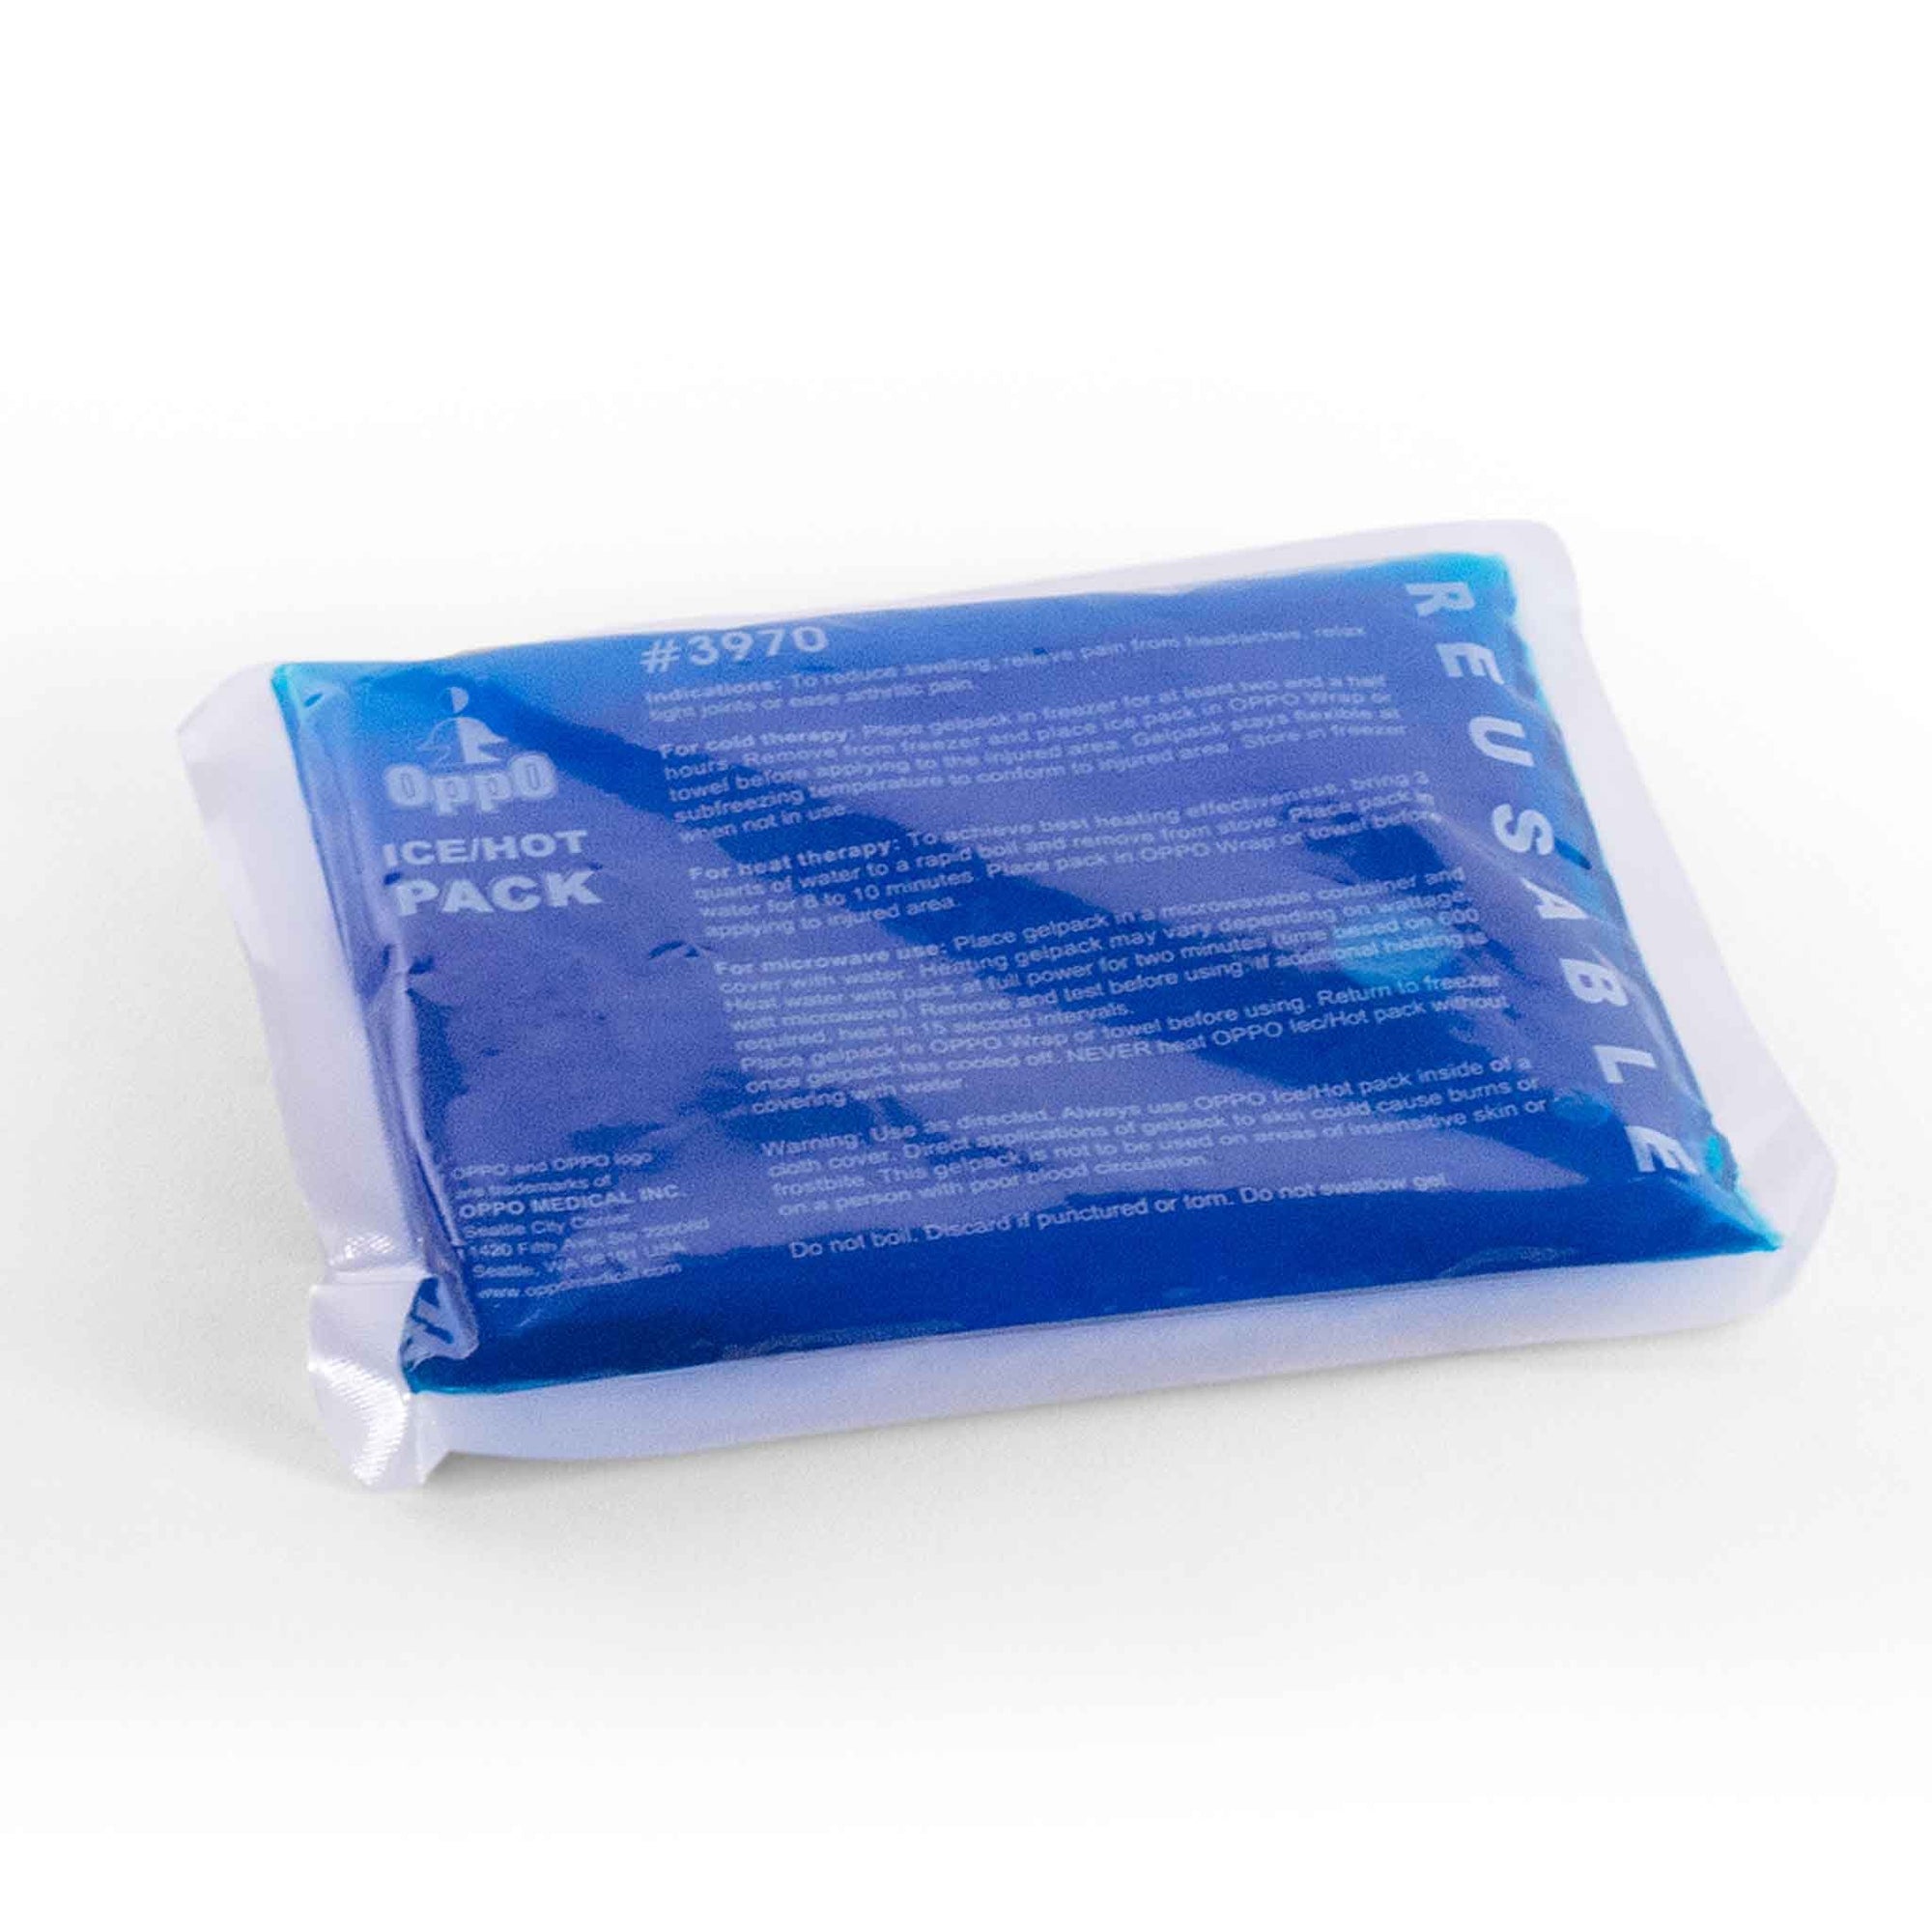 Dual purpose Gel Pack to reduce swelling post injury with Cold Therapy and seek pain relief due to stiff joints and Musculoskeletal Disorders